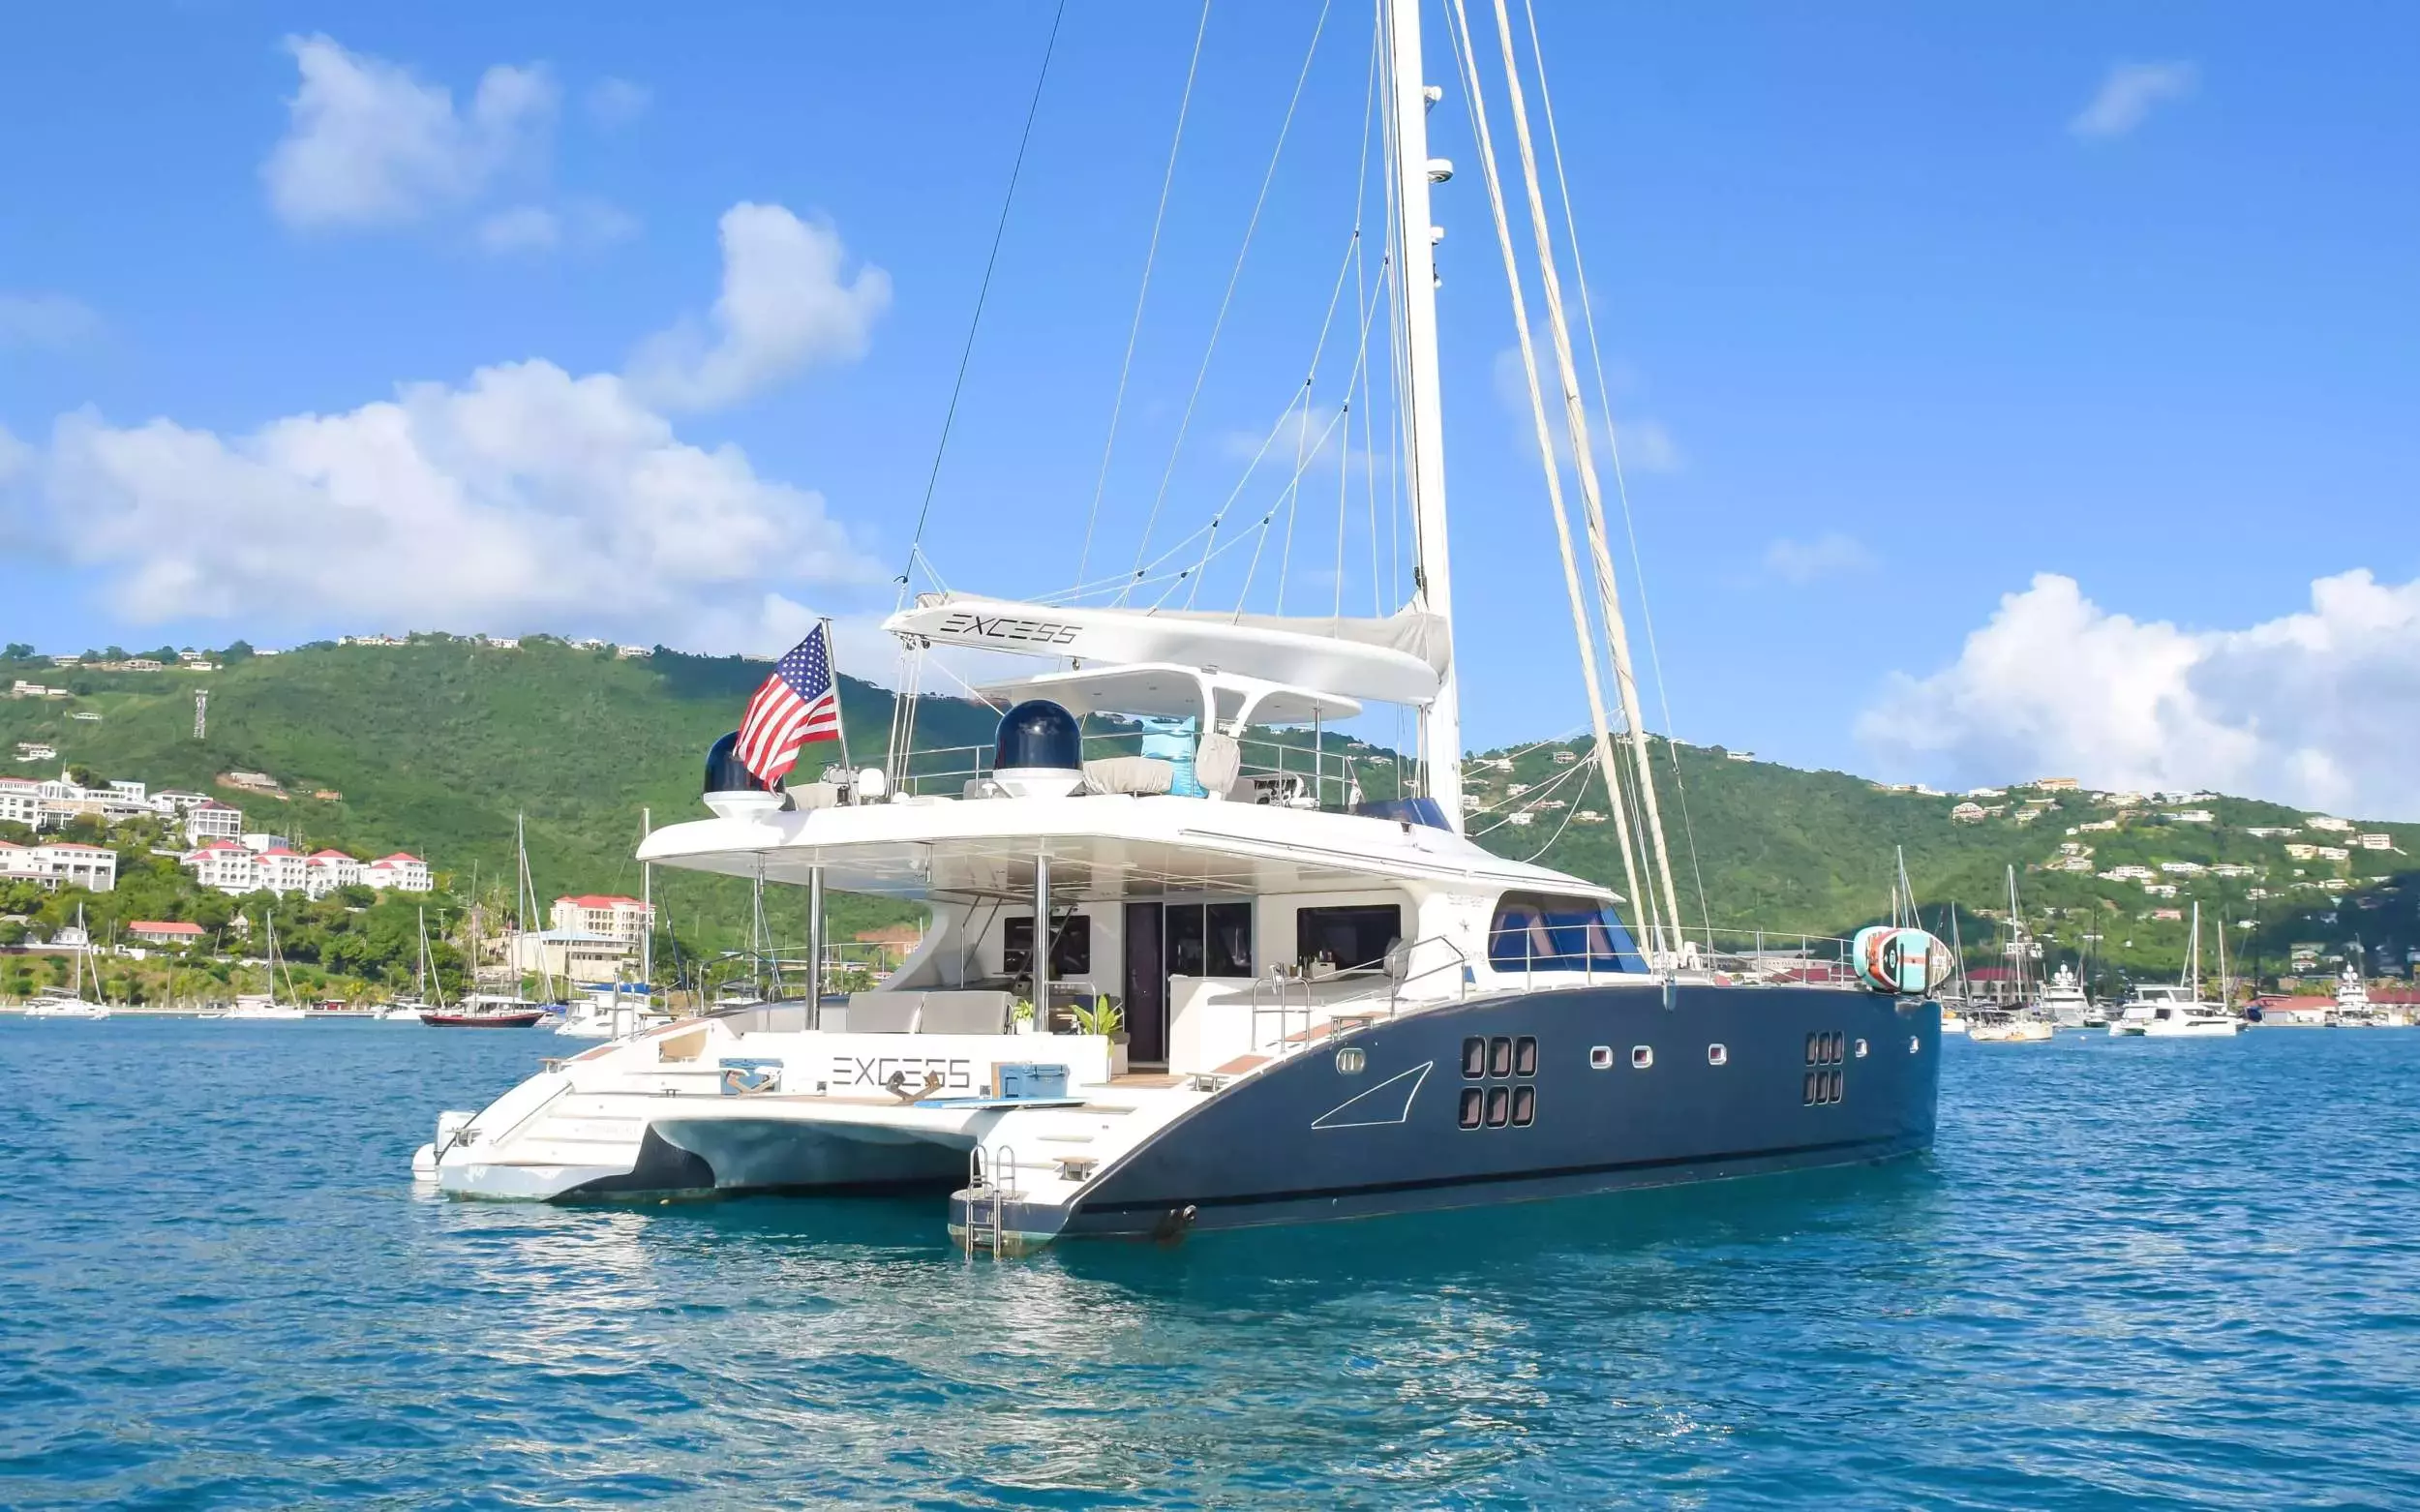 Excess by Sunreef Yachts - Special Offer for a private Luxury Catamaran Charter in St John with a crew